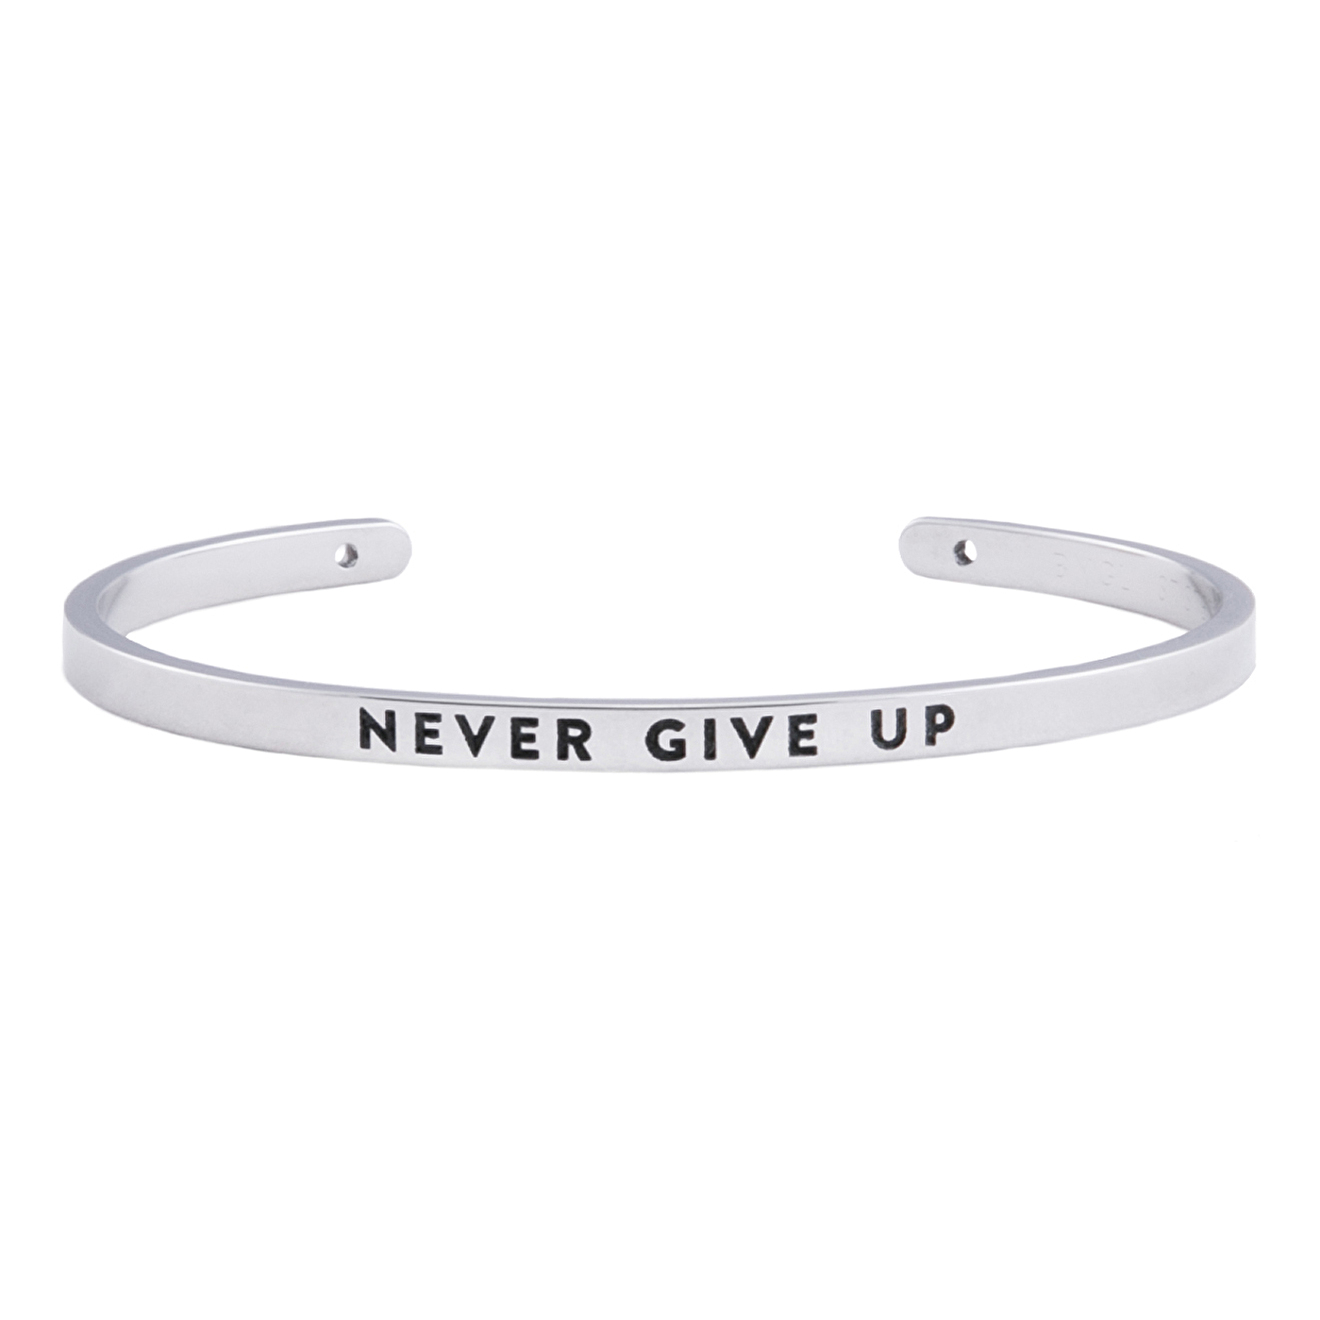 BNGL браслет NEVER GIVE UP браслет never give up черный силикон 20 2 см